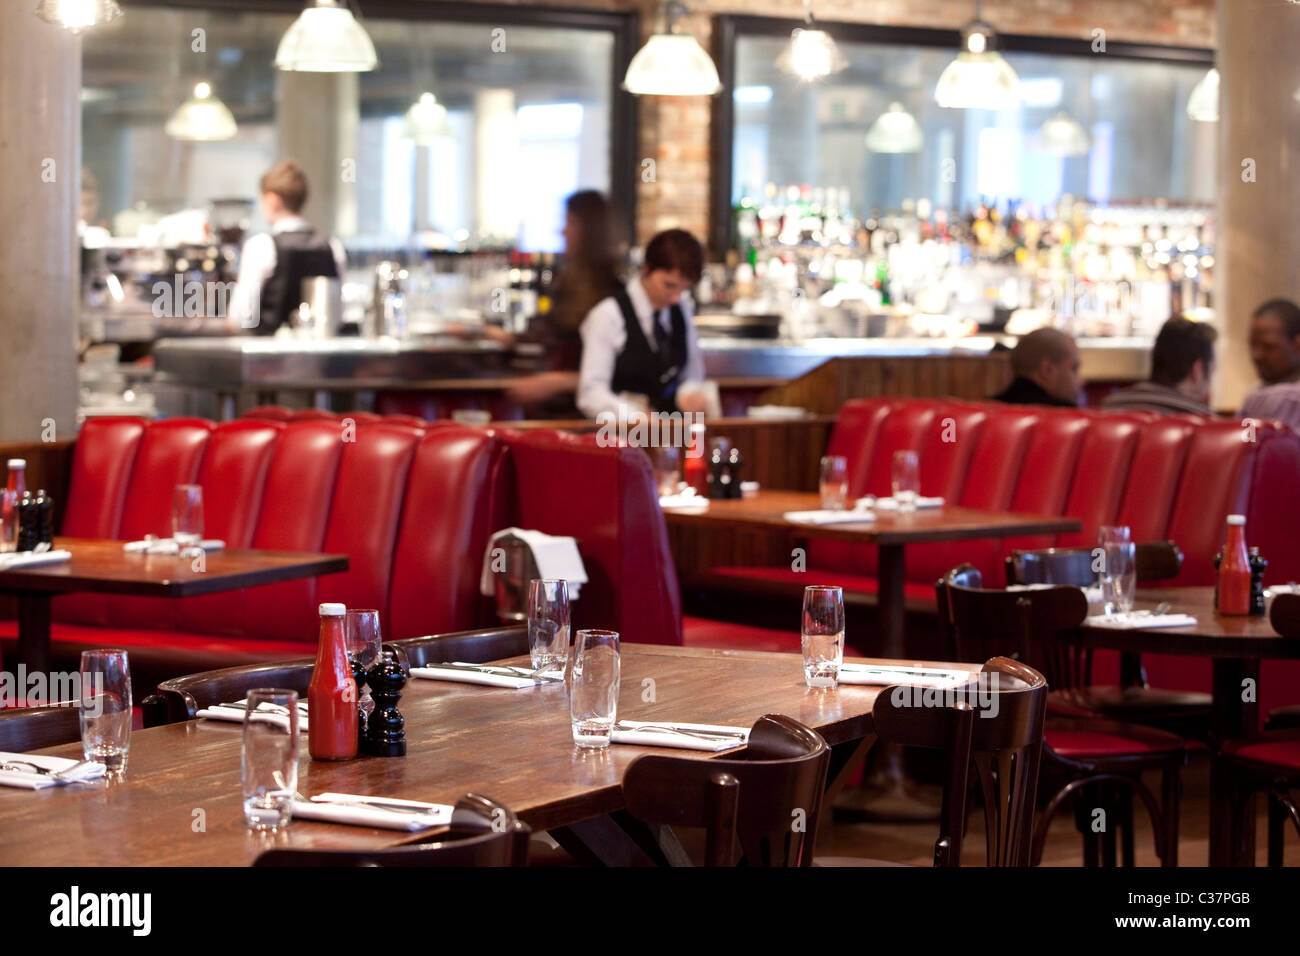 The Hoxton Hotel Hoxton Grill in Shoreditch, London Stock Photo - Alamy